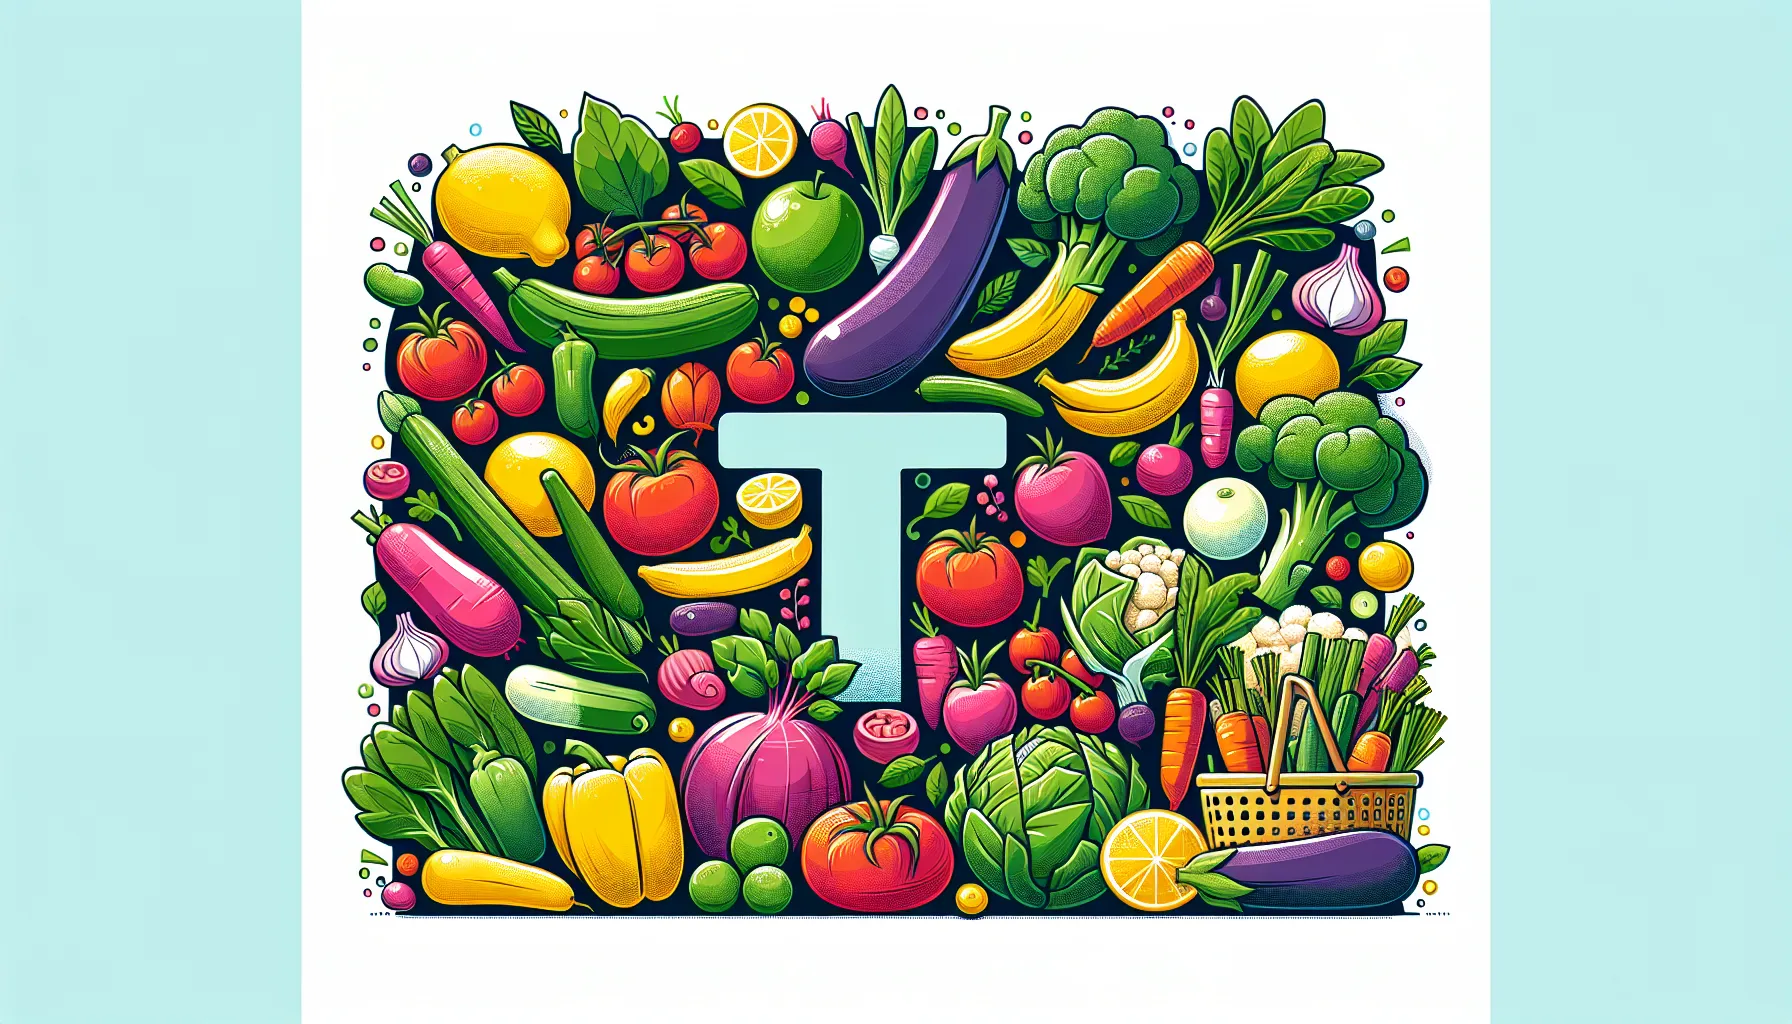 Colorful illustration of a variety of fresh vegetables and fruits arranged in the shape of the letter T, highlighting vegetables that start with T such as tomatoes and turnips.